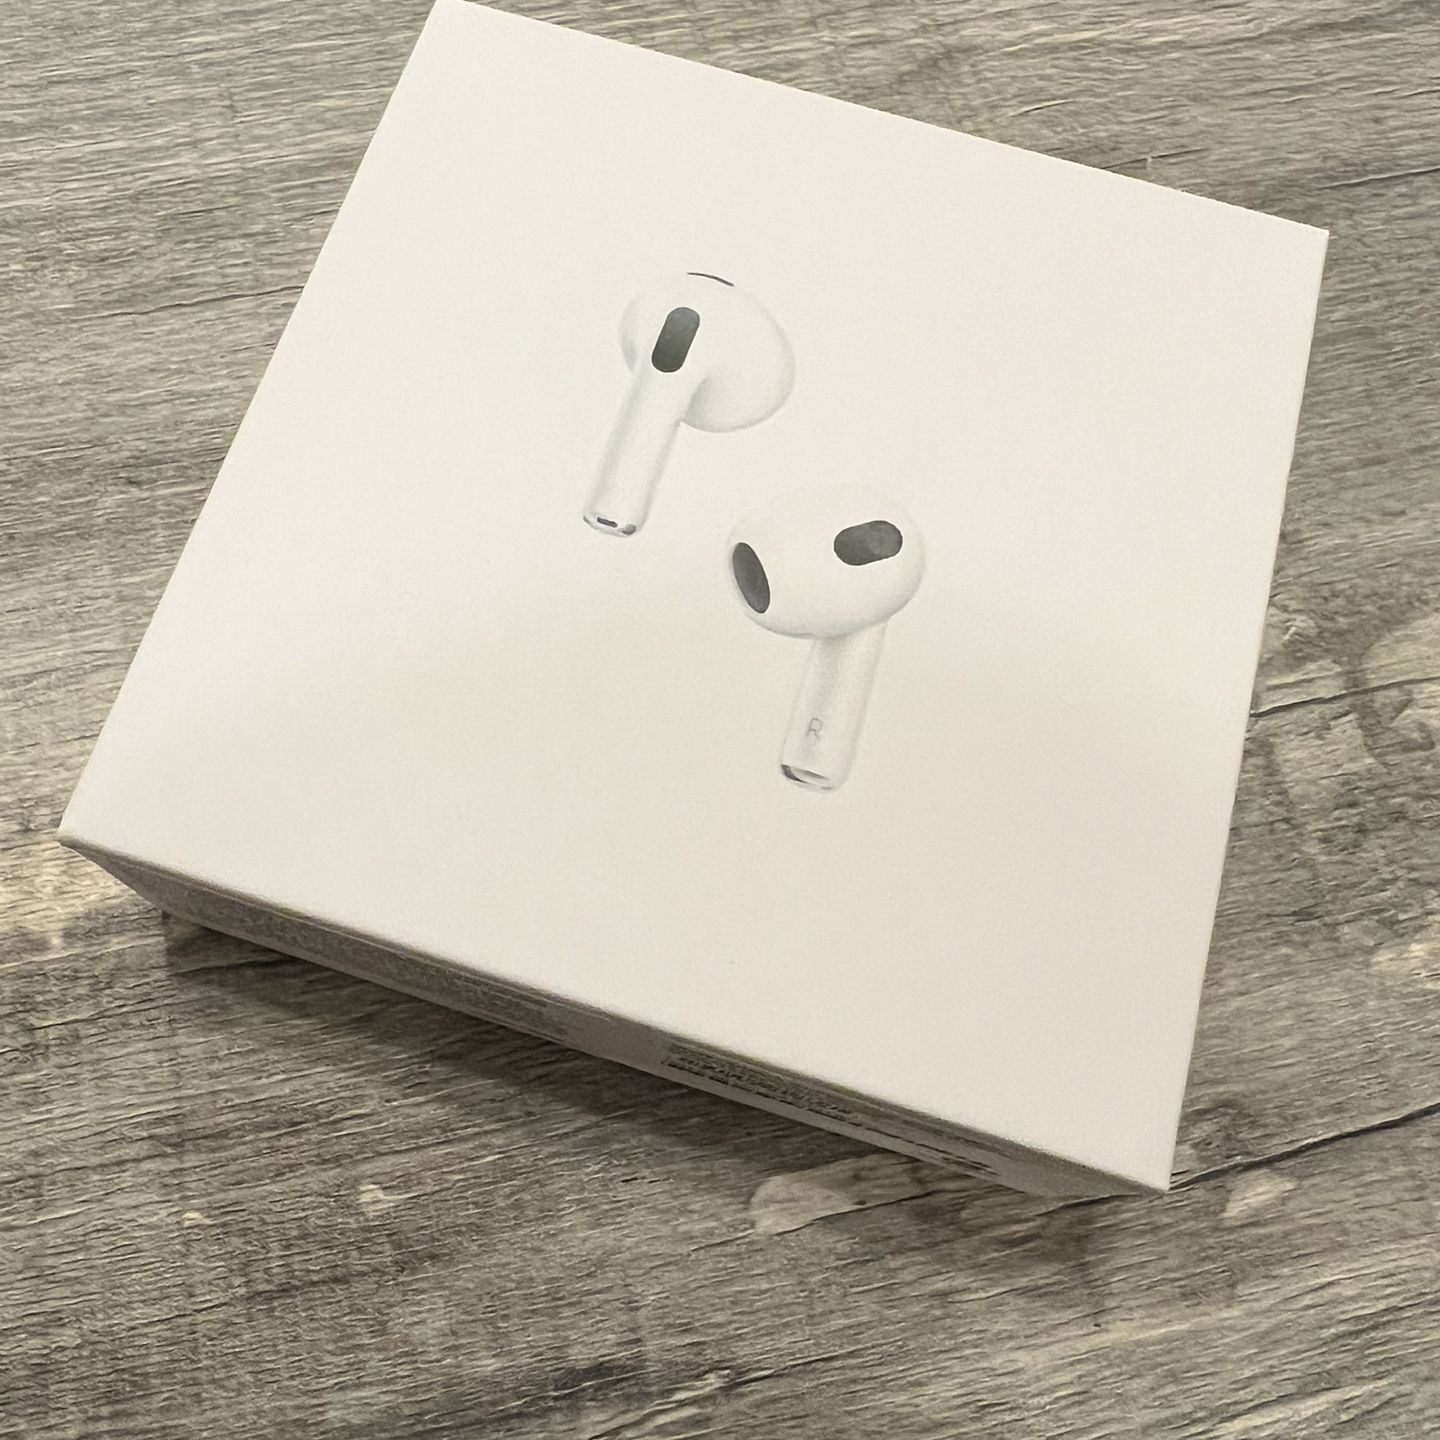 Apple AirPods 3rd Generation with Charging Case 